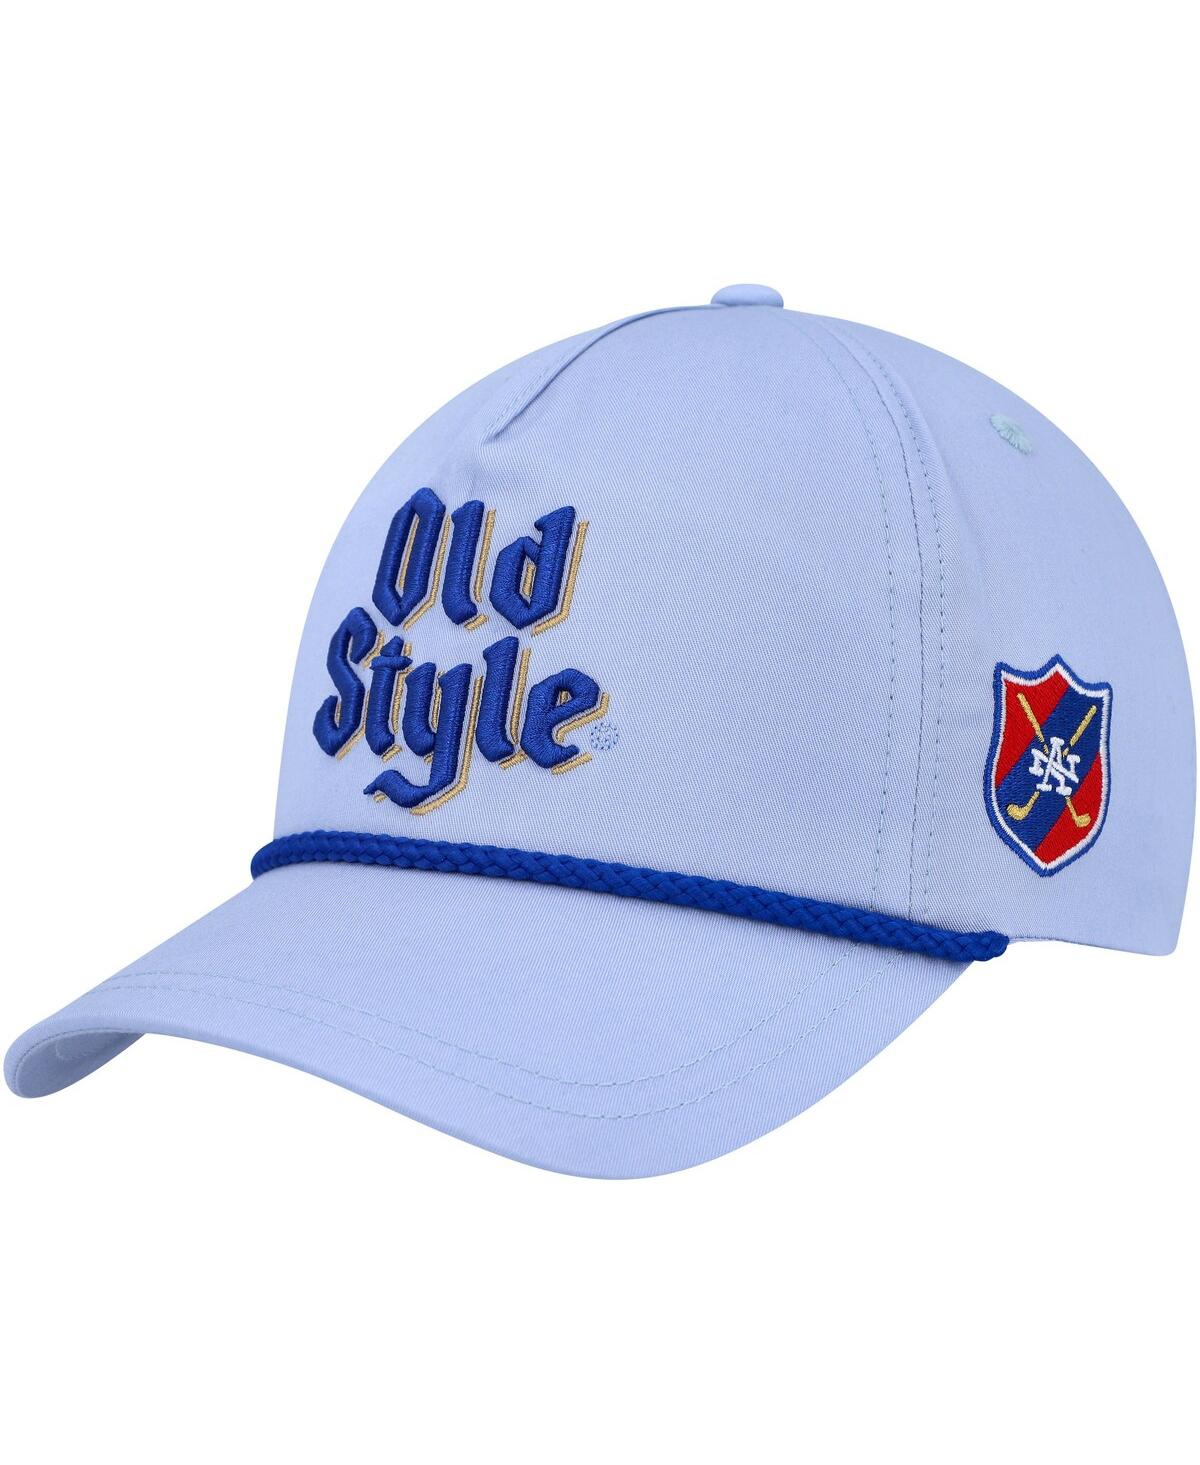 Men's American Needle Blue Old Style Rope Snapback Hat - Blue